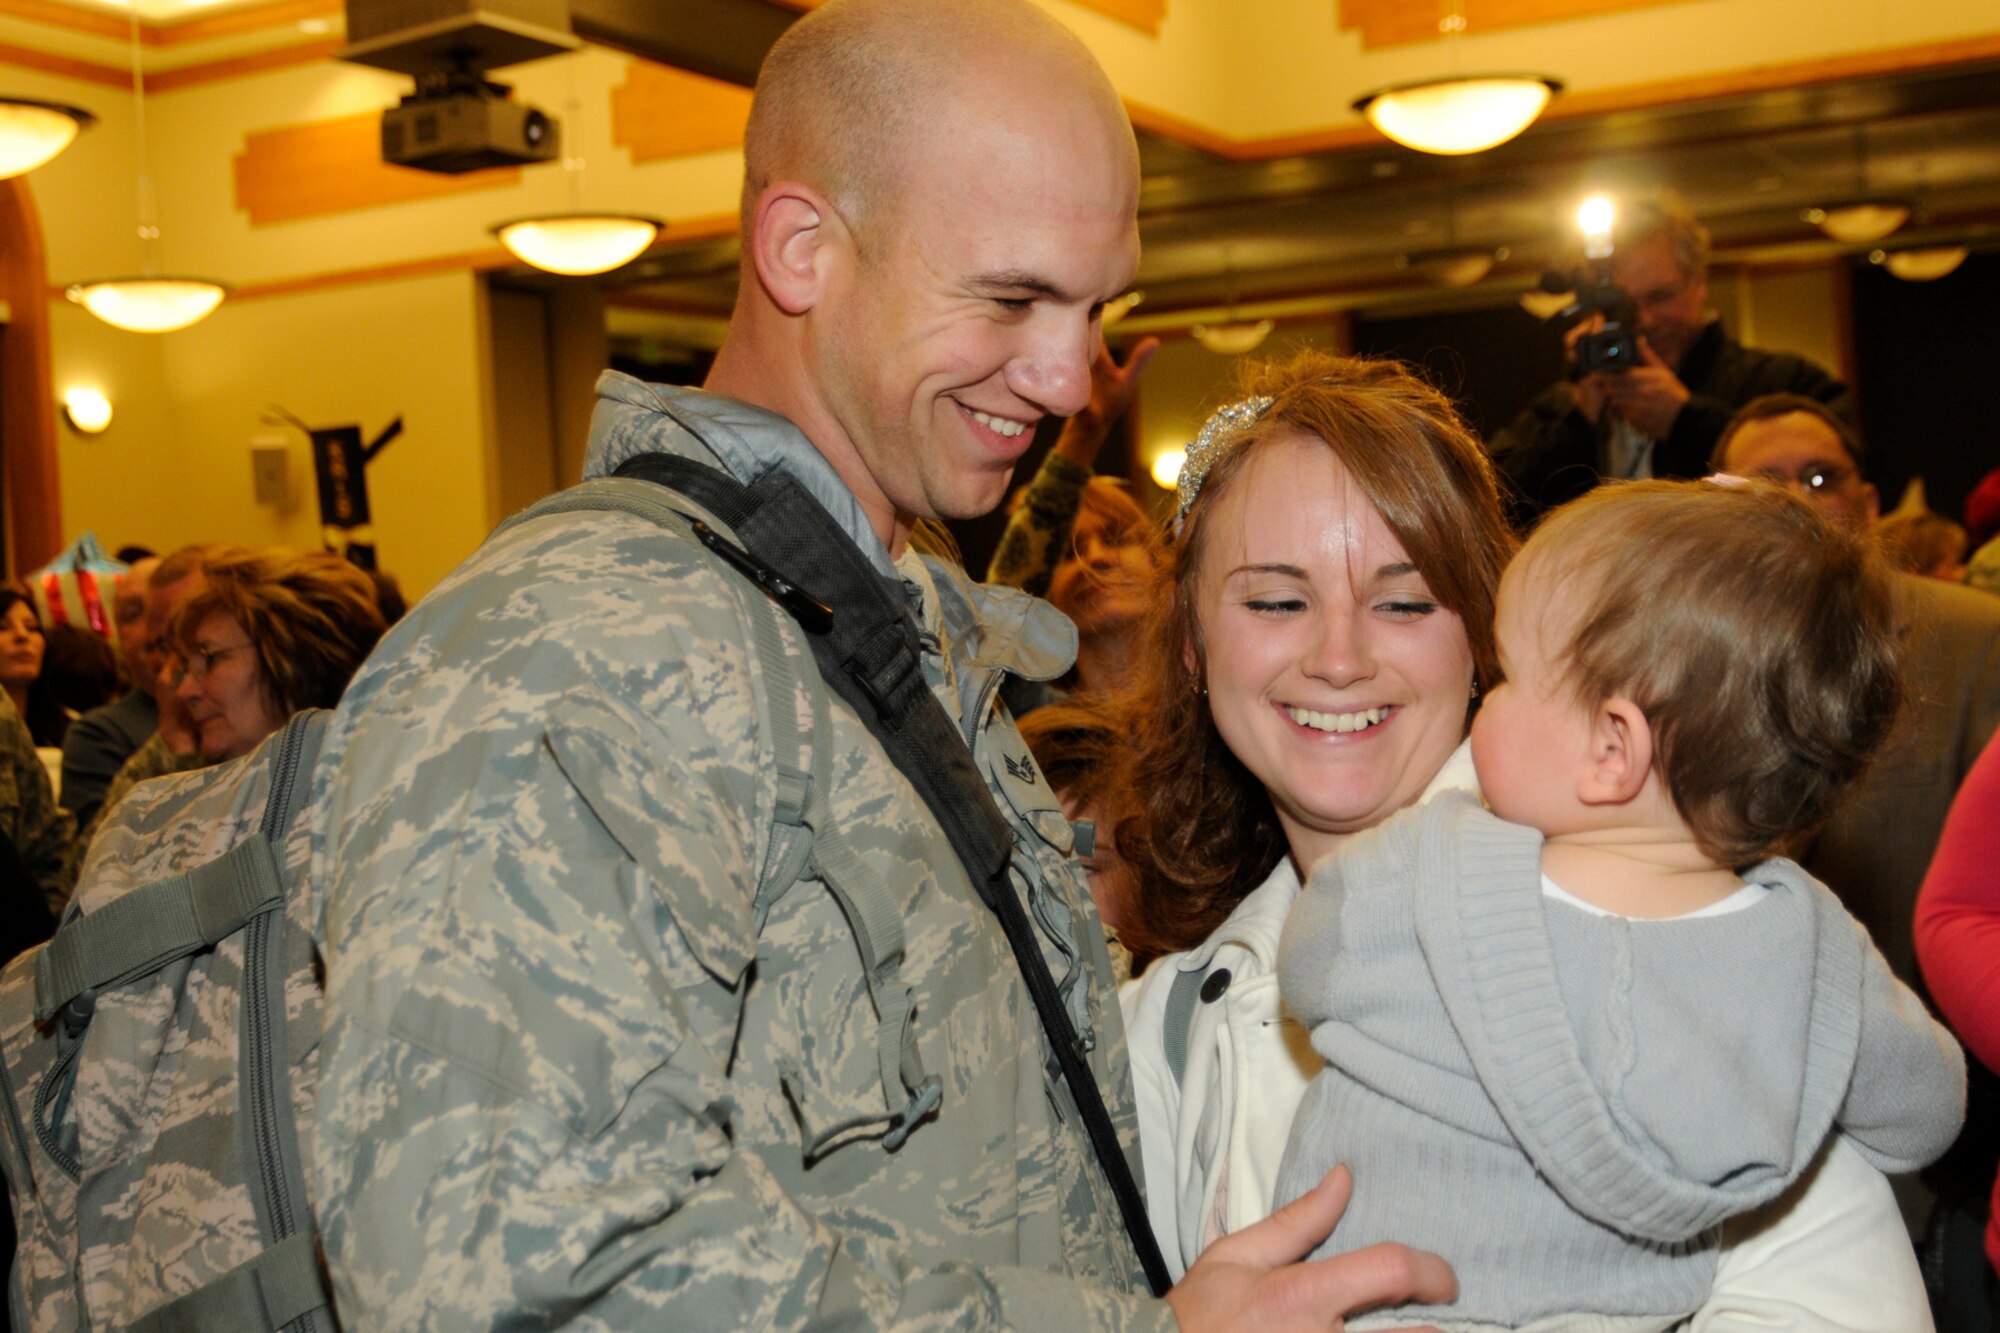 Staff Sergeant Daniel Blair, with the 127th Wing, is welcomed home by his wife, Amanda, and daughter Adaleigh, Jan. 9, 2012. SSgt. Blair, along with about 300 other members of the 127th Wing, returned home after a 4-month deployment to Afghanistan, where they flew, maintained and supported the A-10 Thunderbolt II aircraft. The Airmen are all members of the 127th Wing at Selfridge.  (U.S. Air Force photo by TSgt Dave Kujawa)
